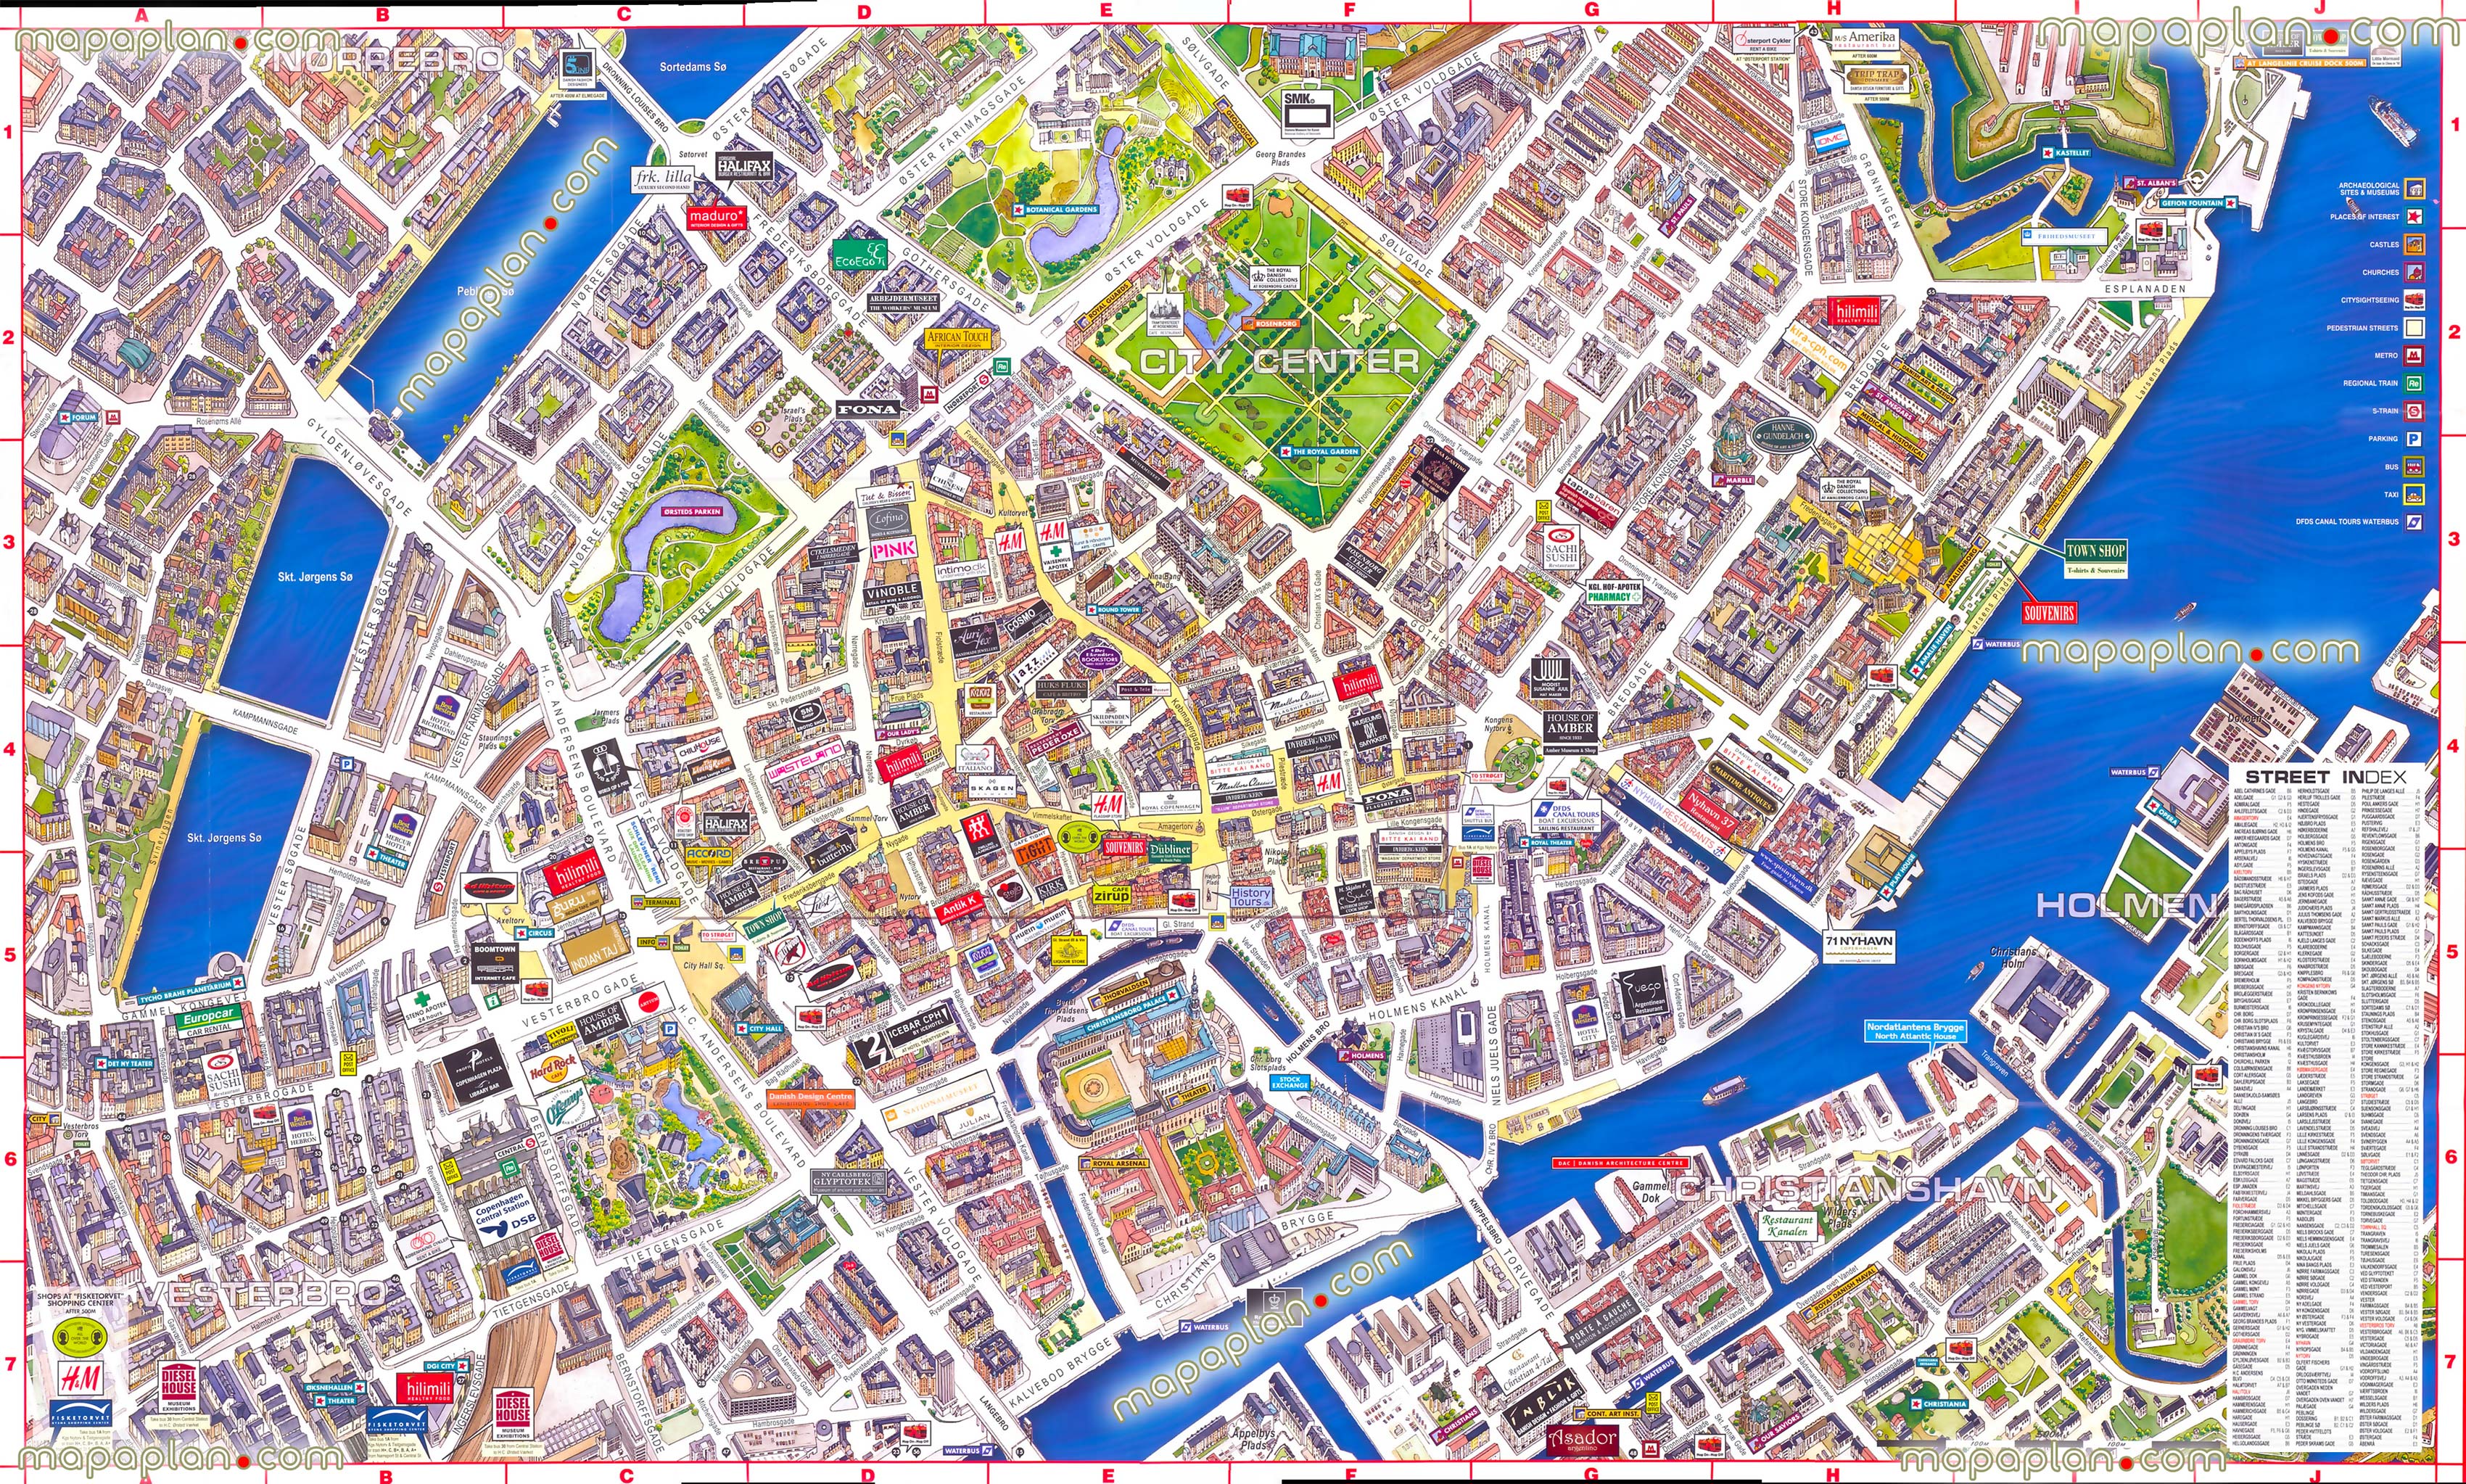 virtual interactive 3d Copenhagen denmark city center free printable visitors detailed guide download tourists aerial satellite poster view inner city old town buildings must see sights sightseeing places interest nyhavn tivoli gardenss Copenhagen Top tourist attractions map